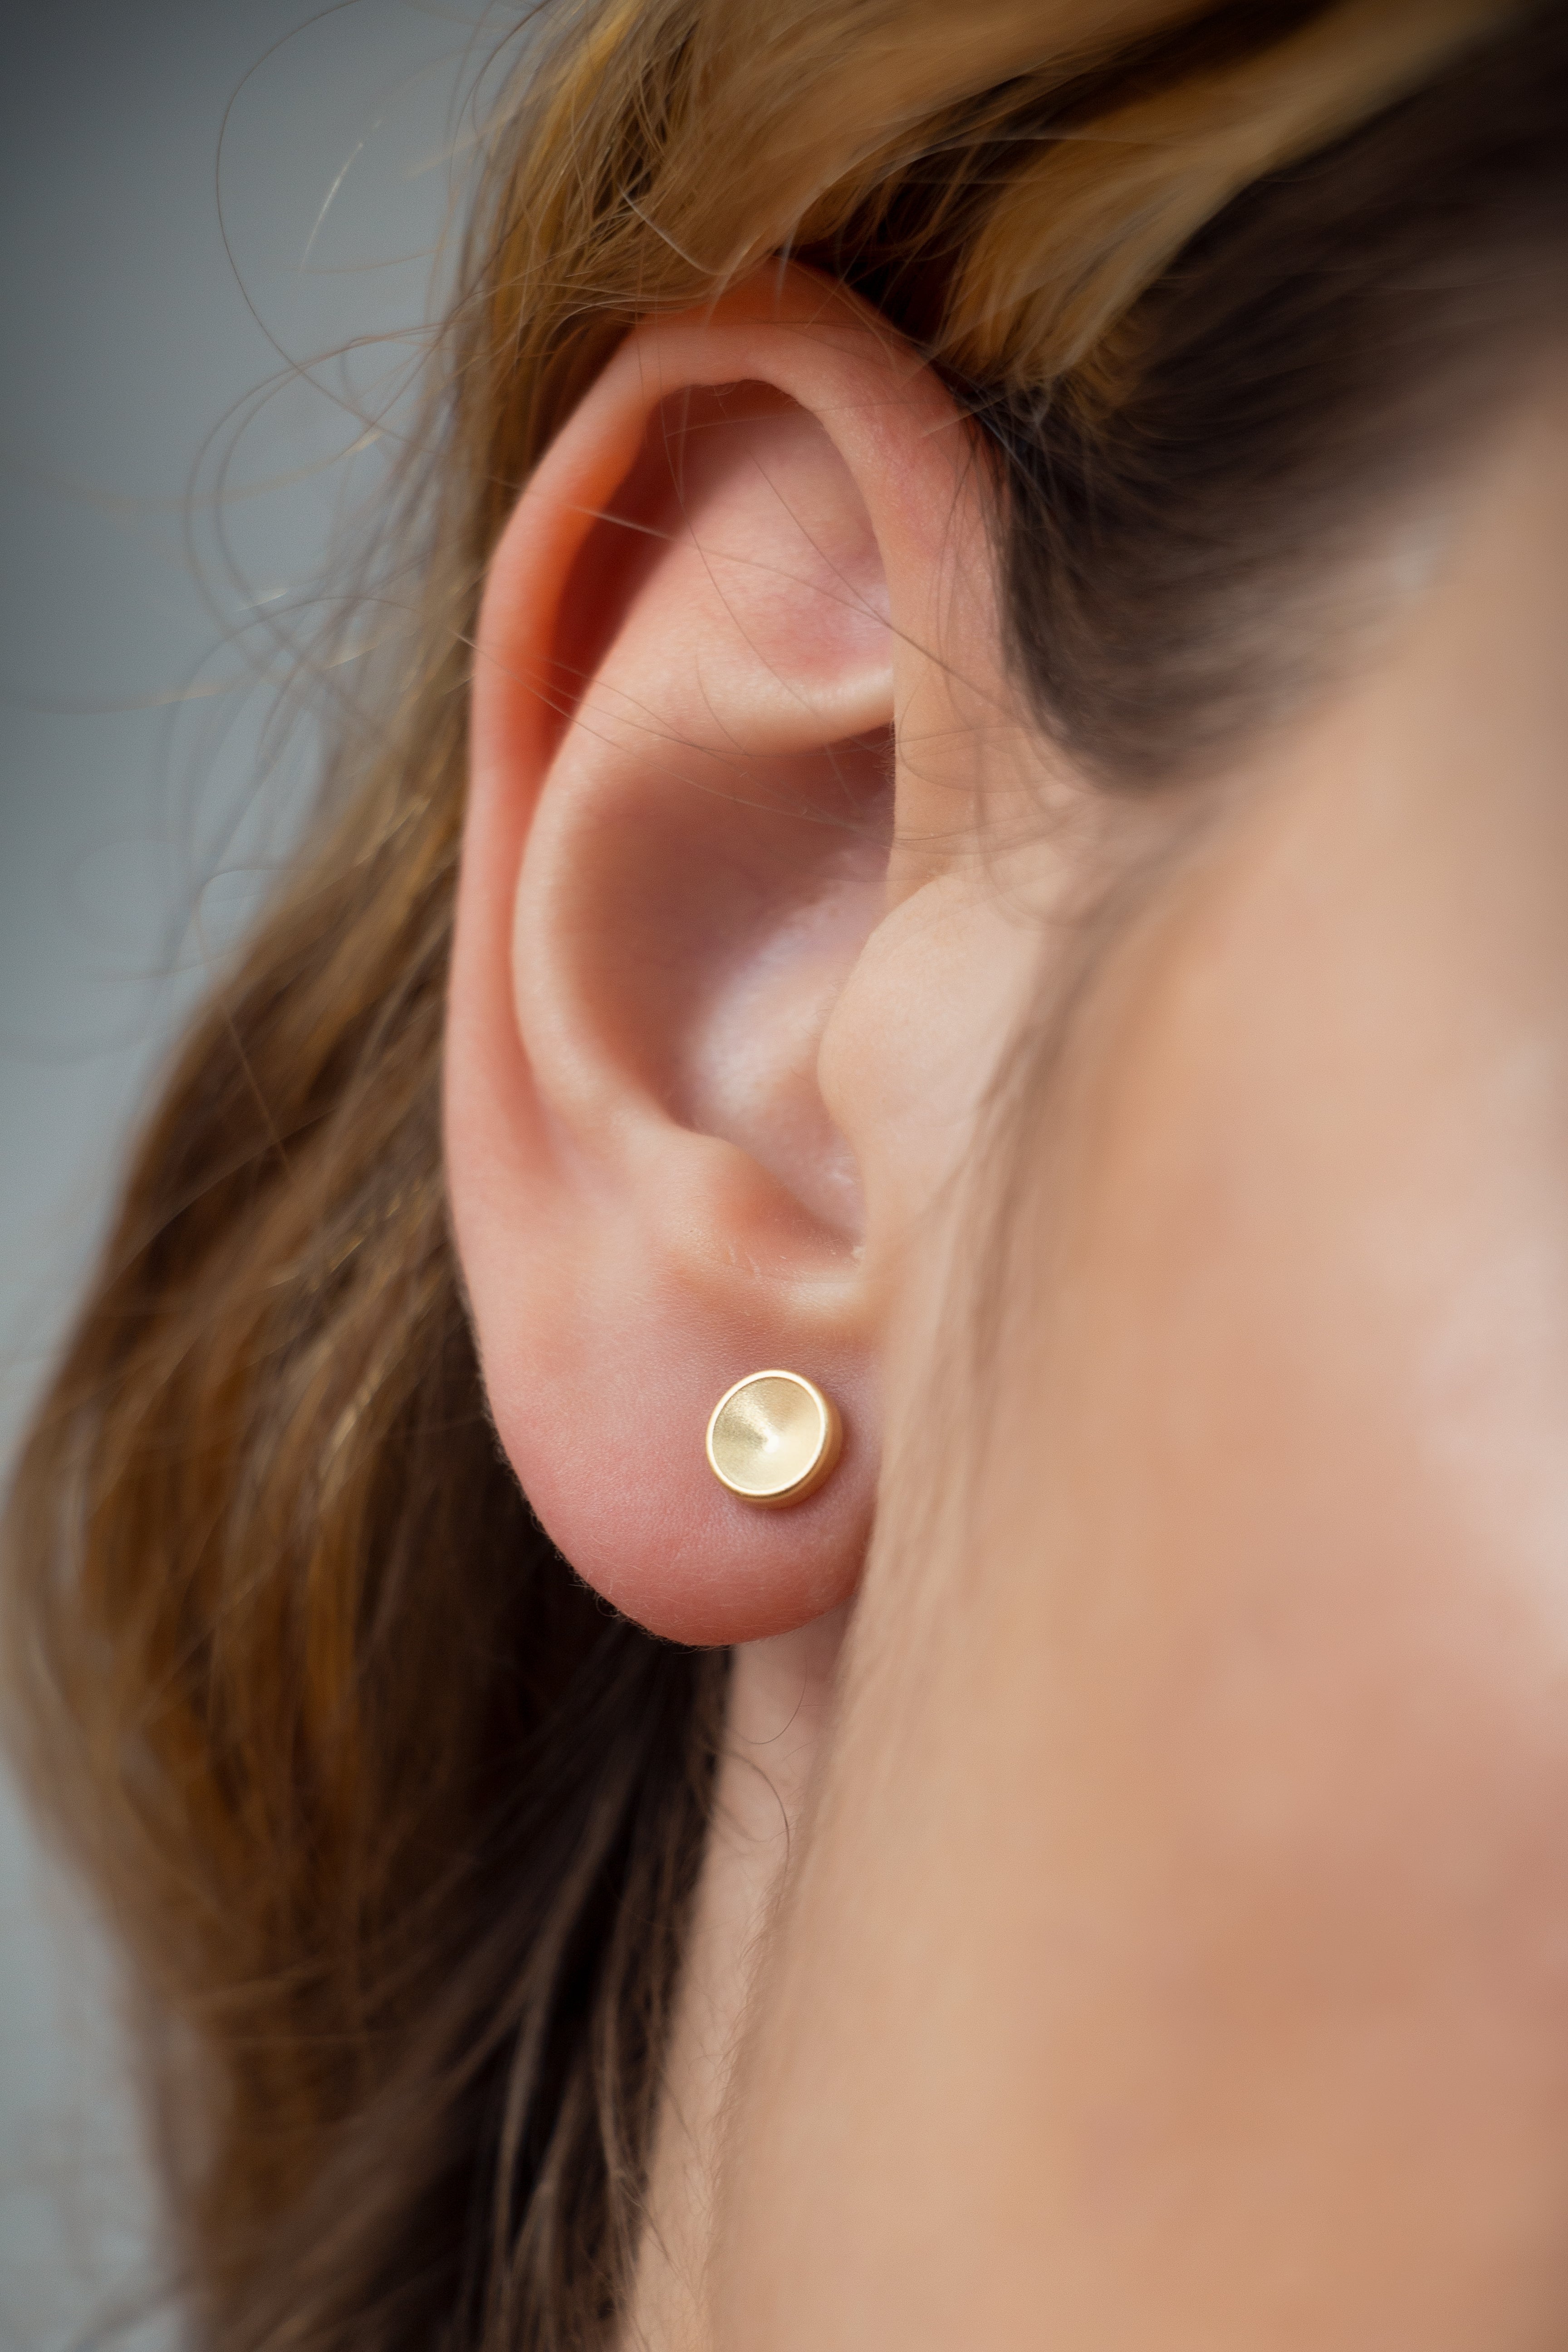 14k Yellow Gold Concave Button Disc Small Earrings Stud Post Satin Finish Screwback Closure